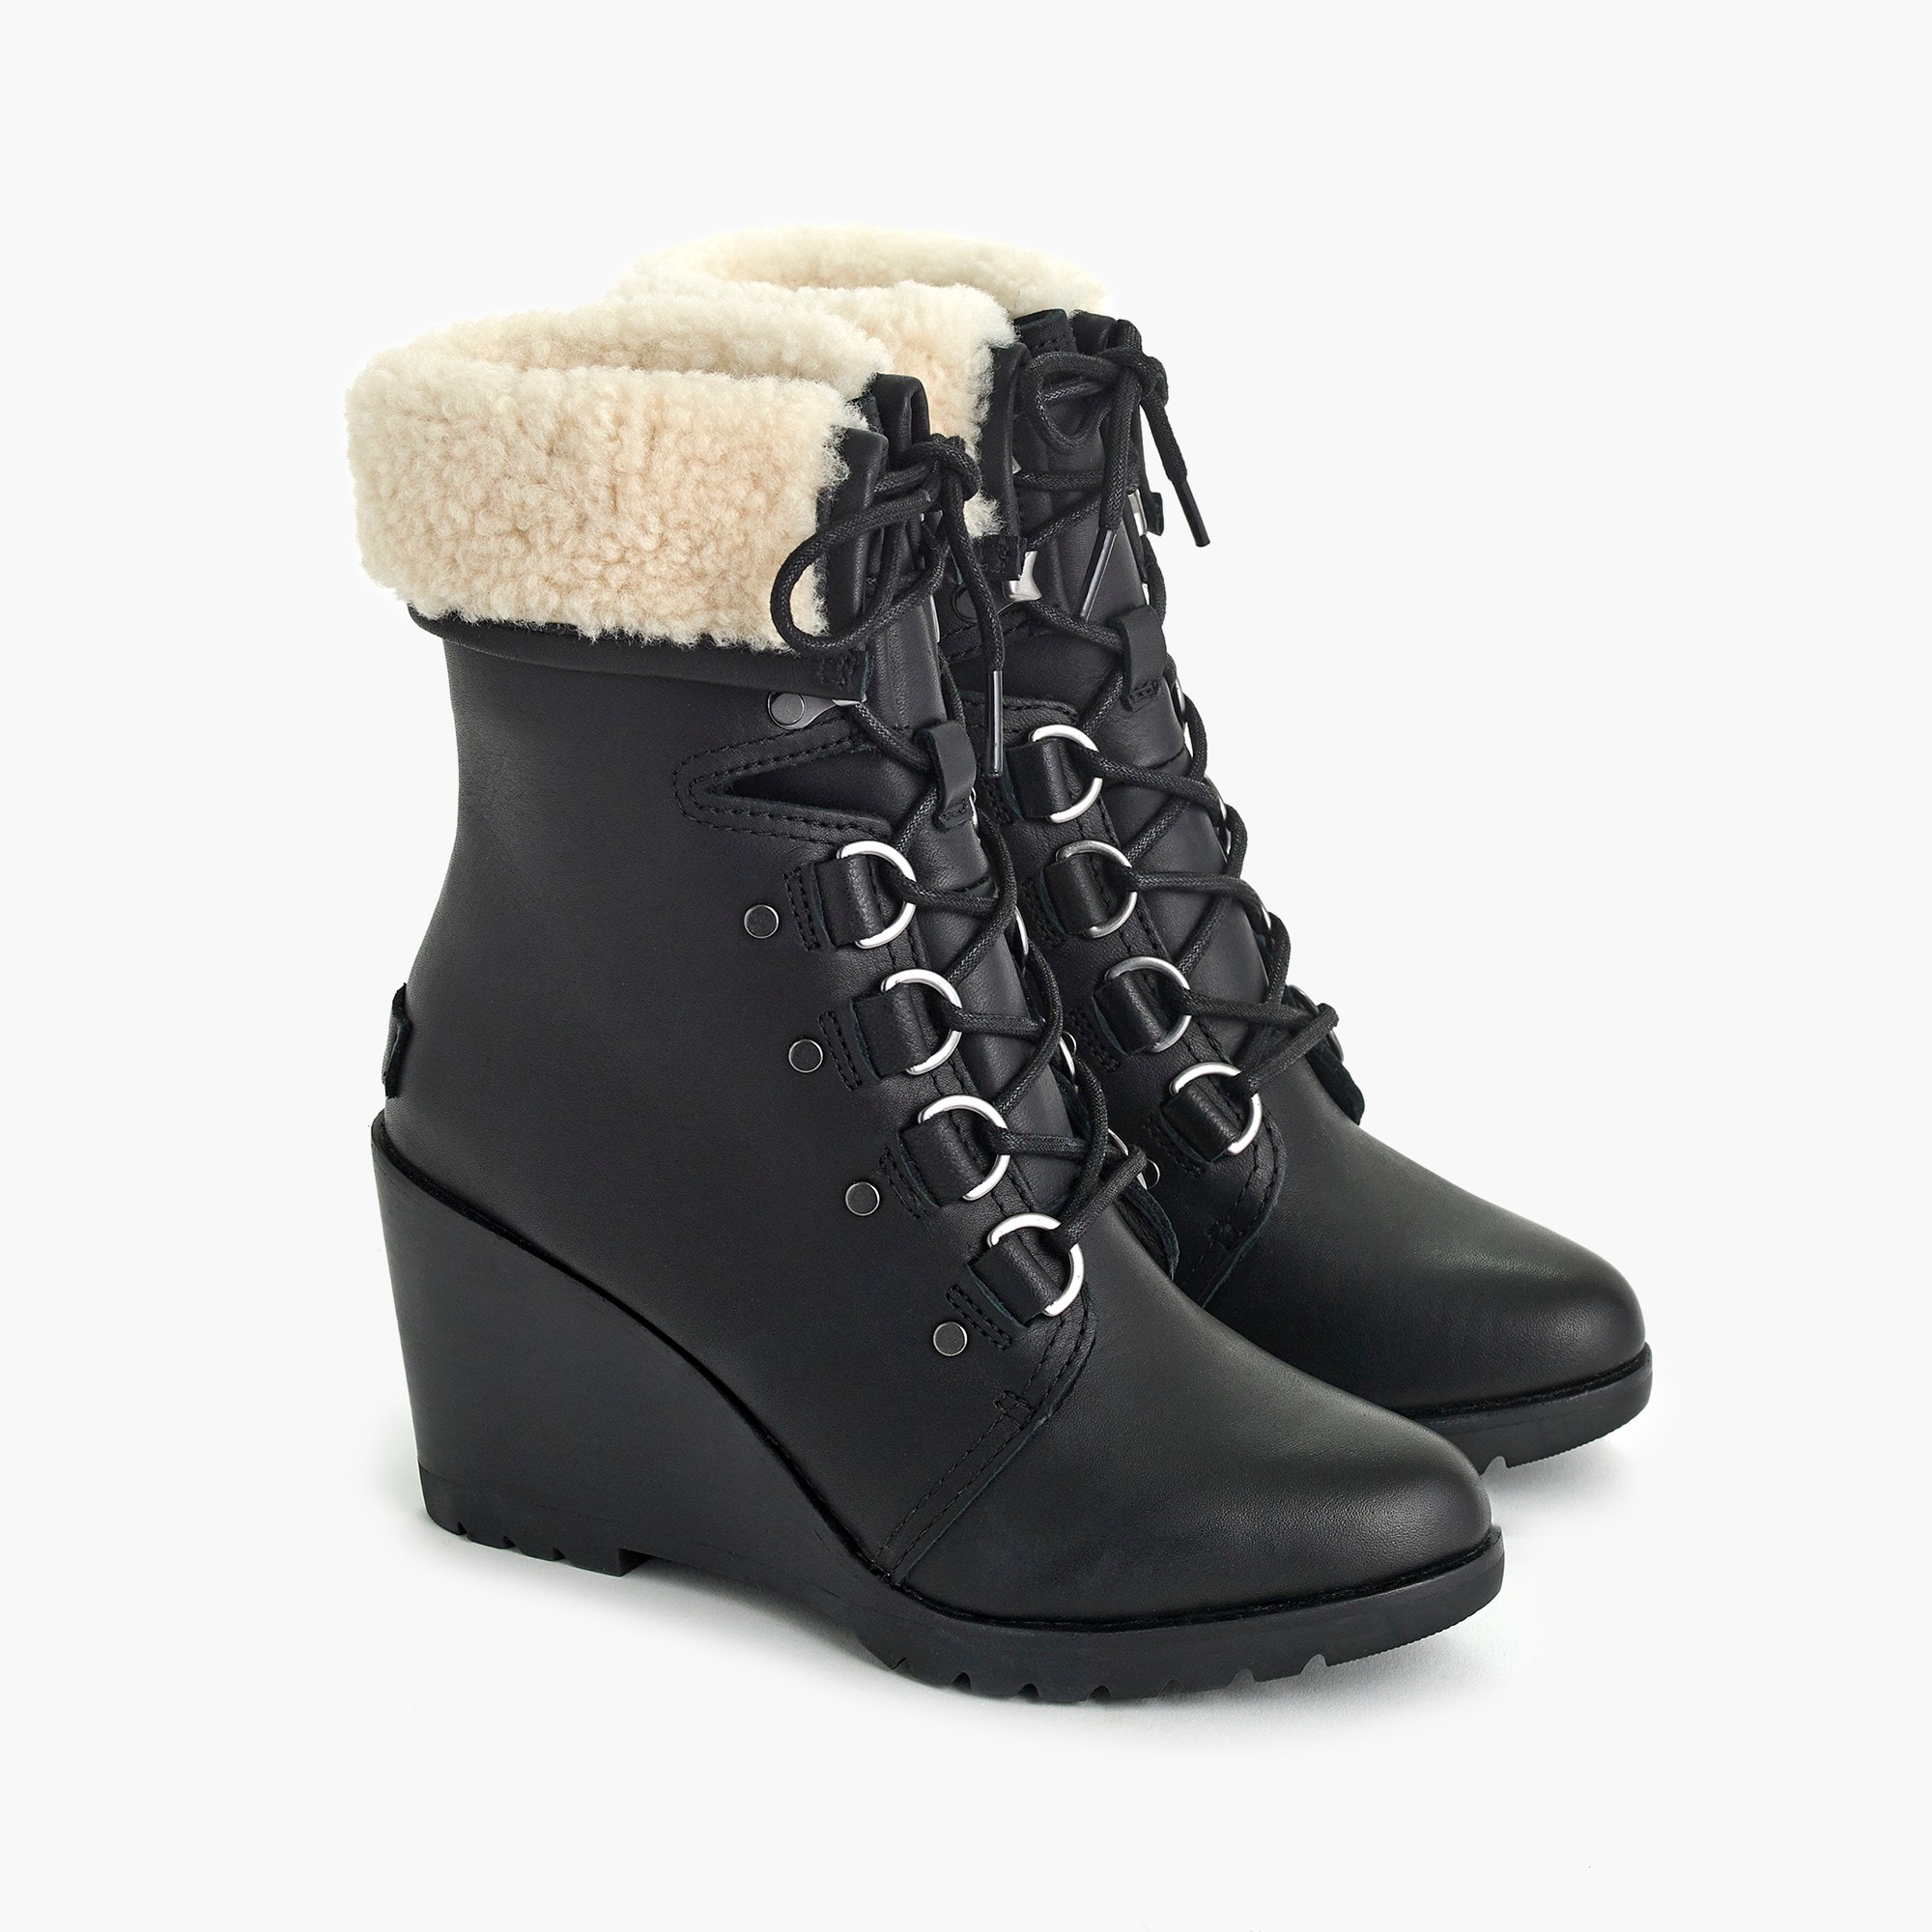 sorel after hours lace up bootie